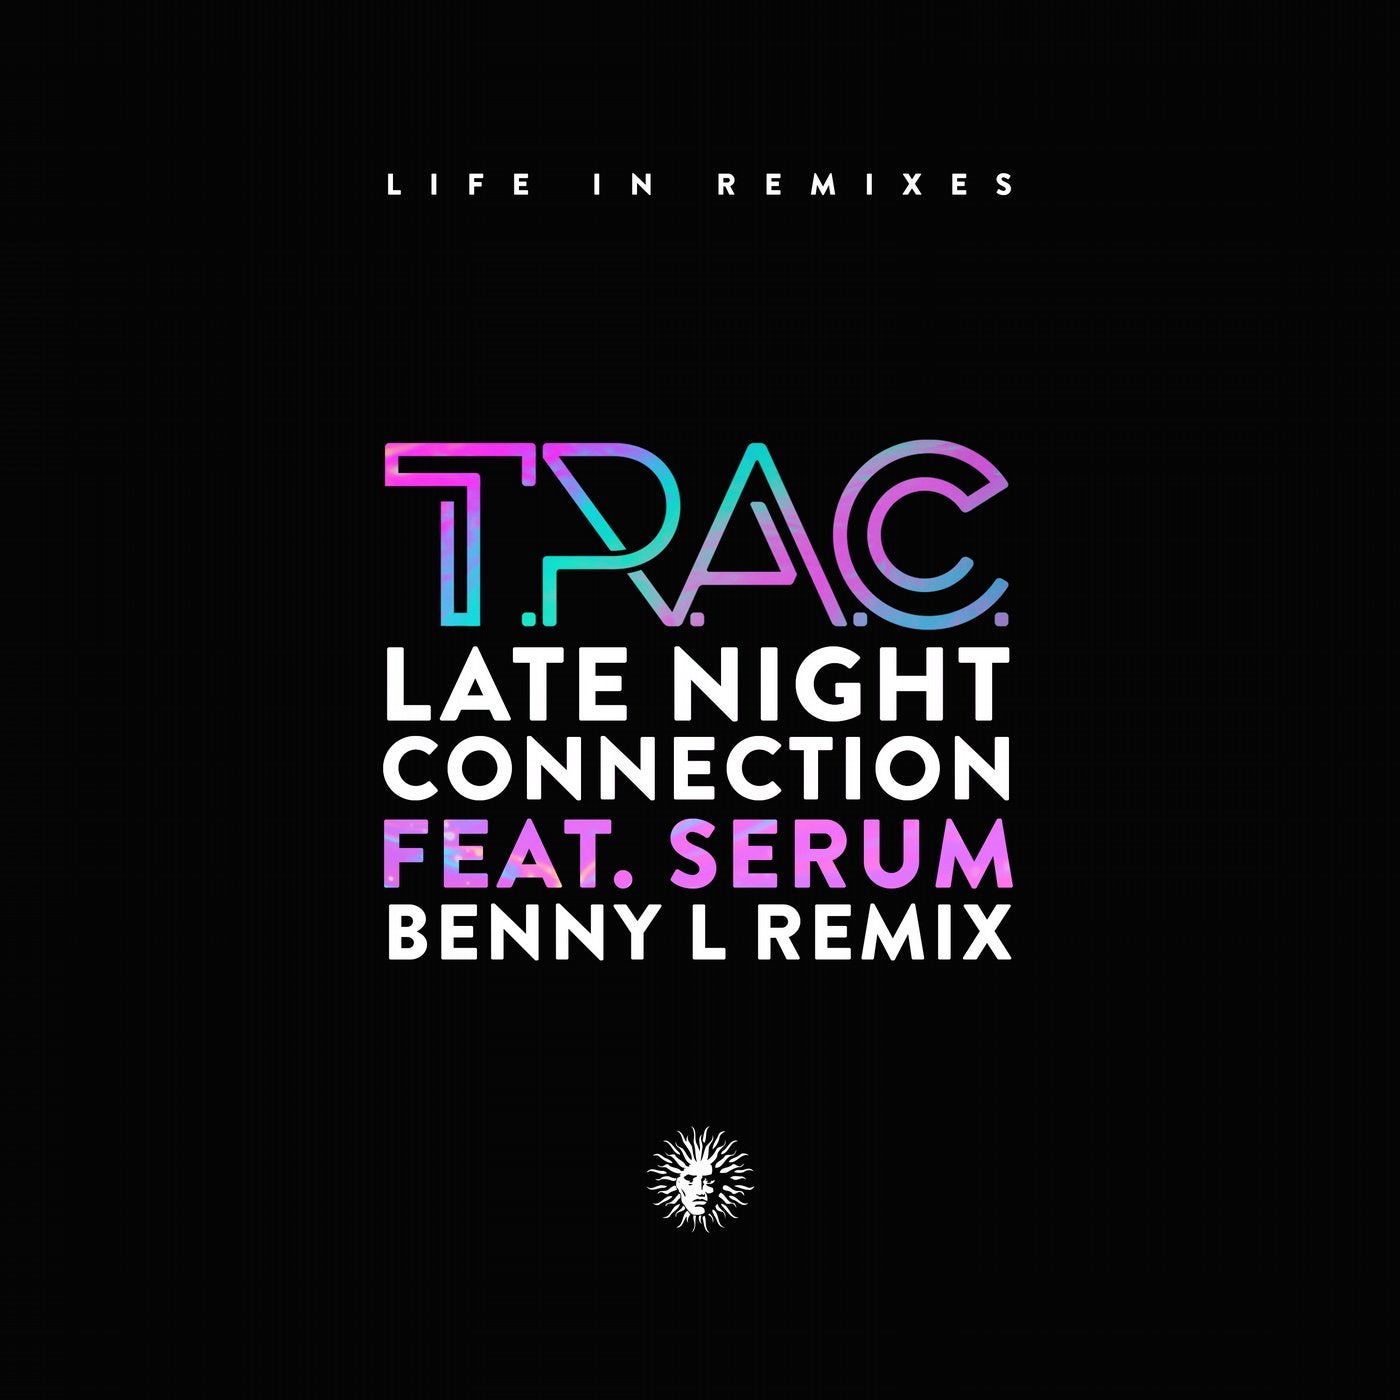 Late Night Connection (feat. Serum) [Benny L Remix]